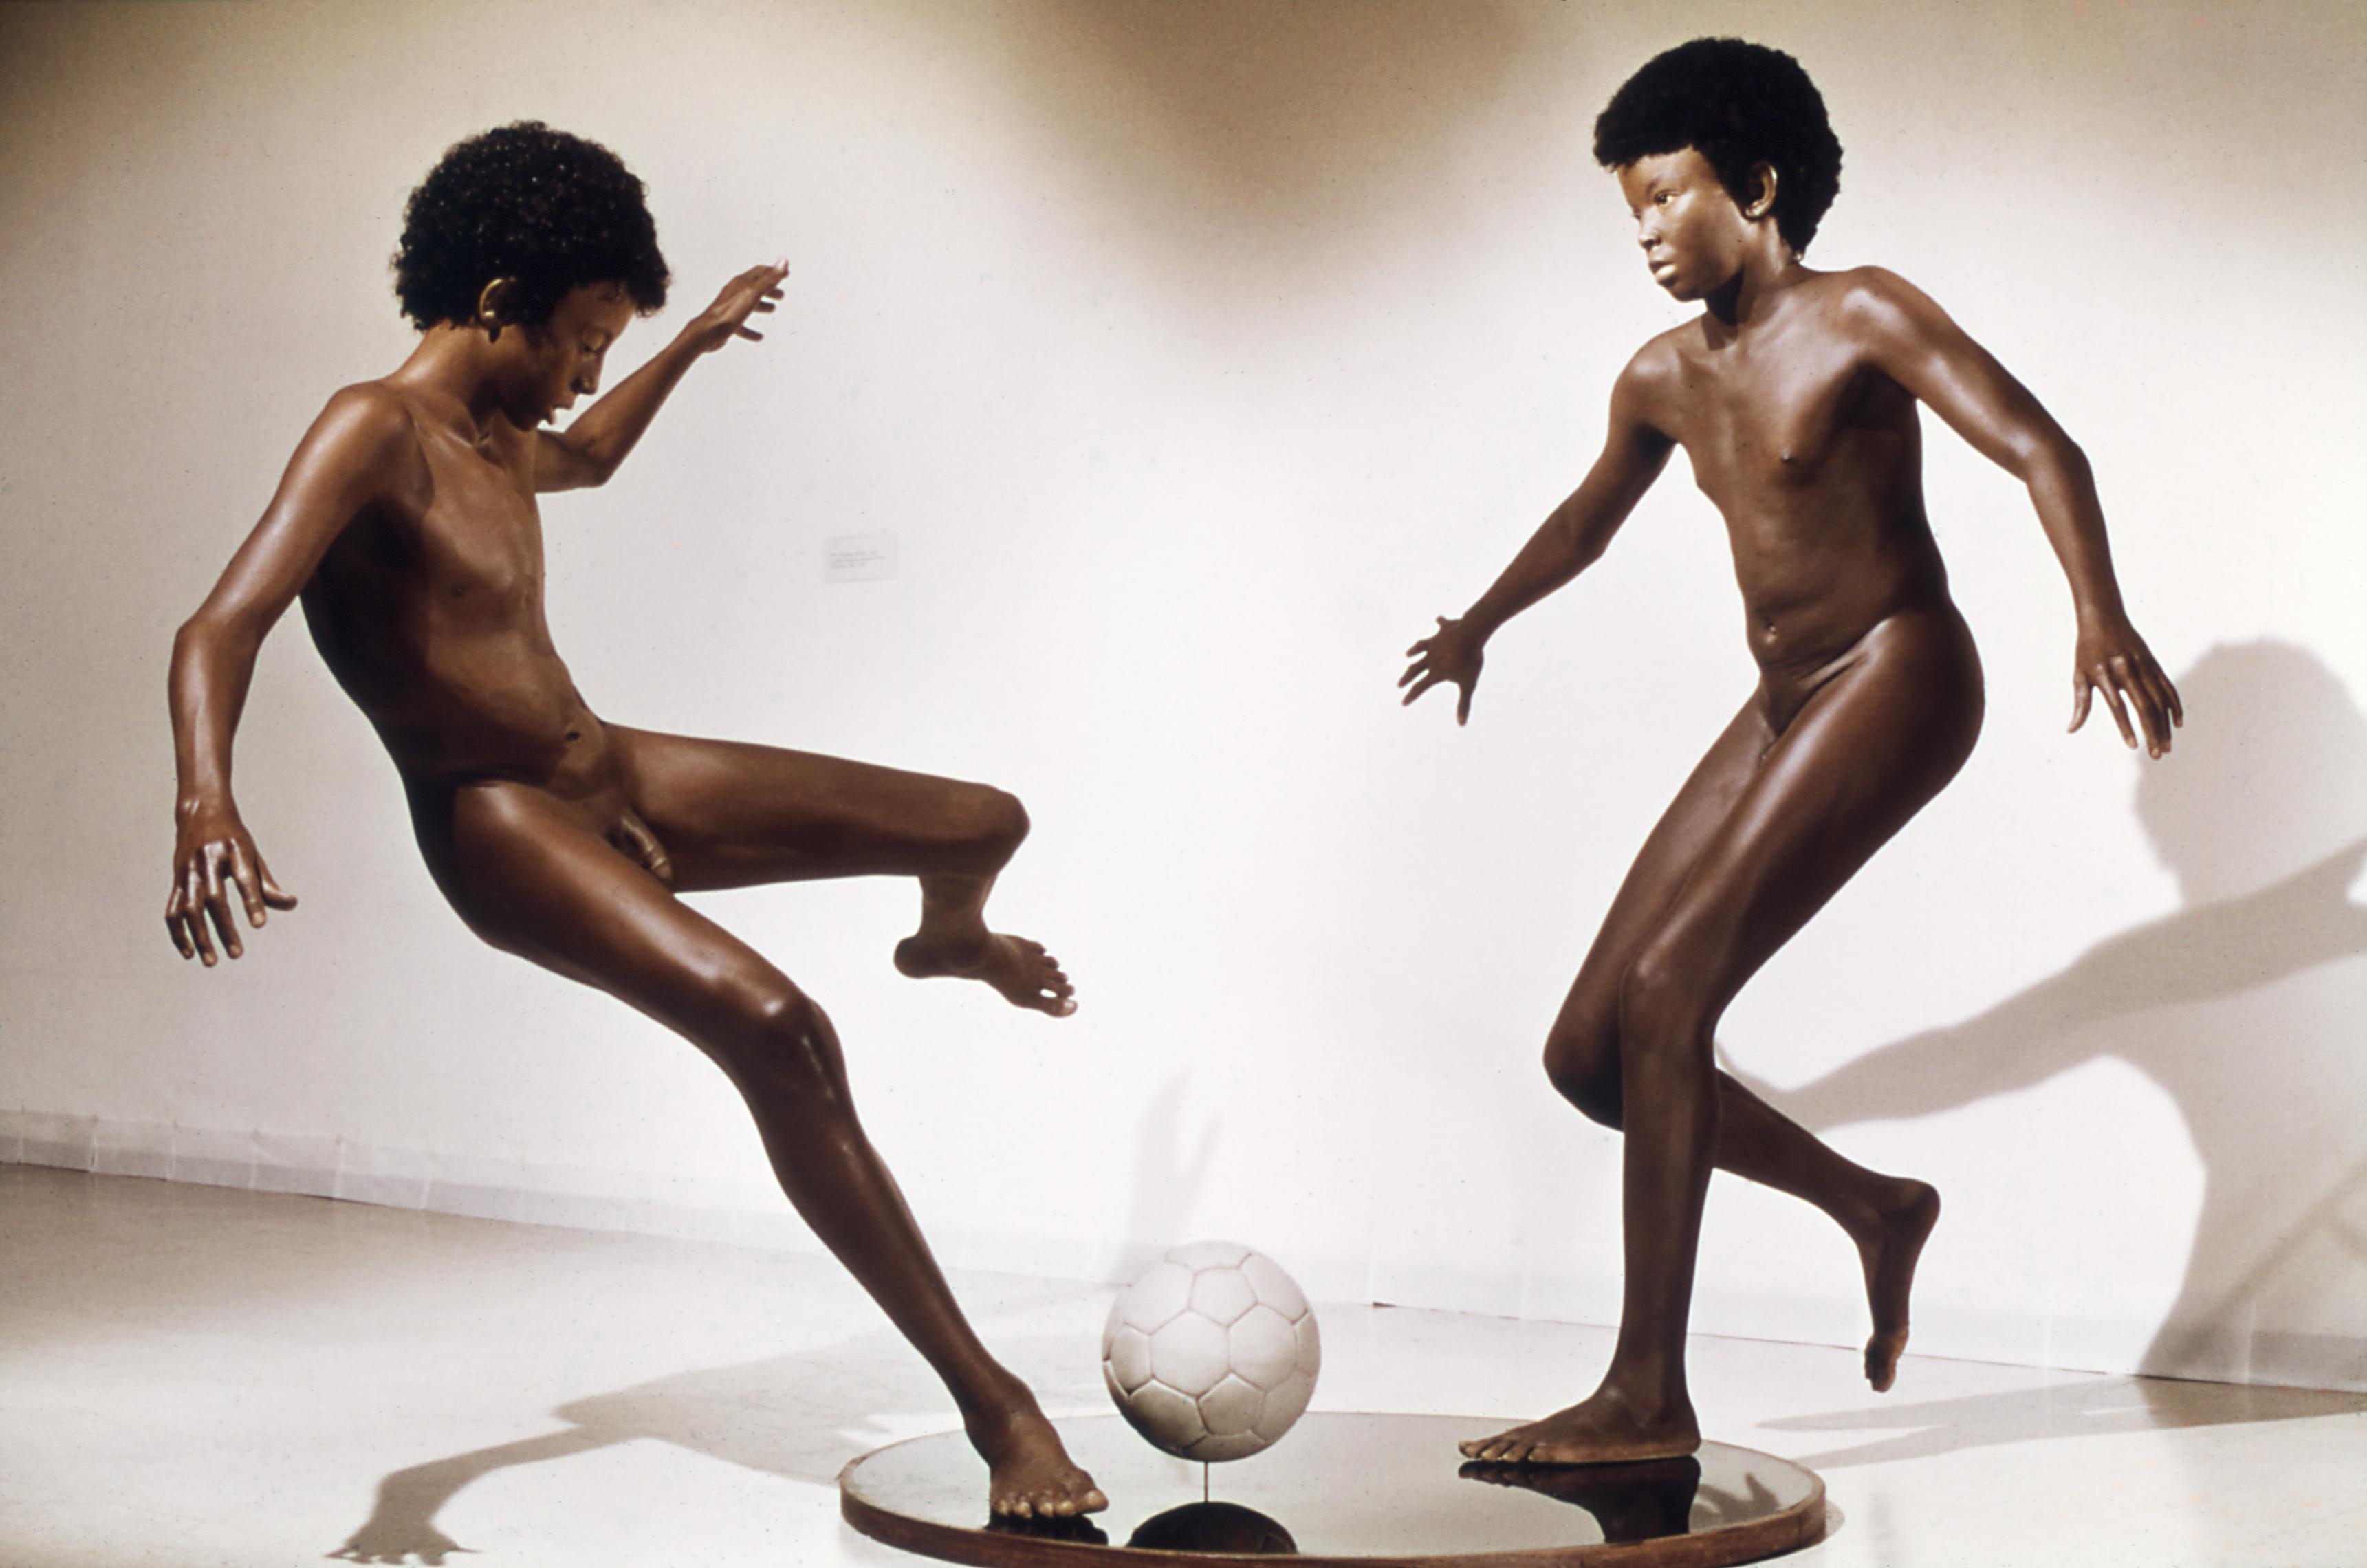 Life-size sculpture of two young nude boys with afros play soccer. One is running up to the ball, the other winds up for a kick.